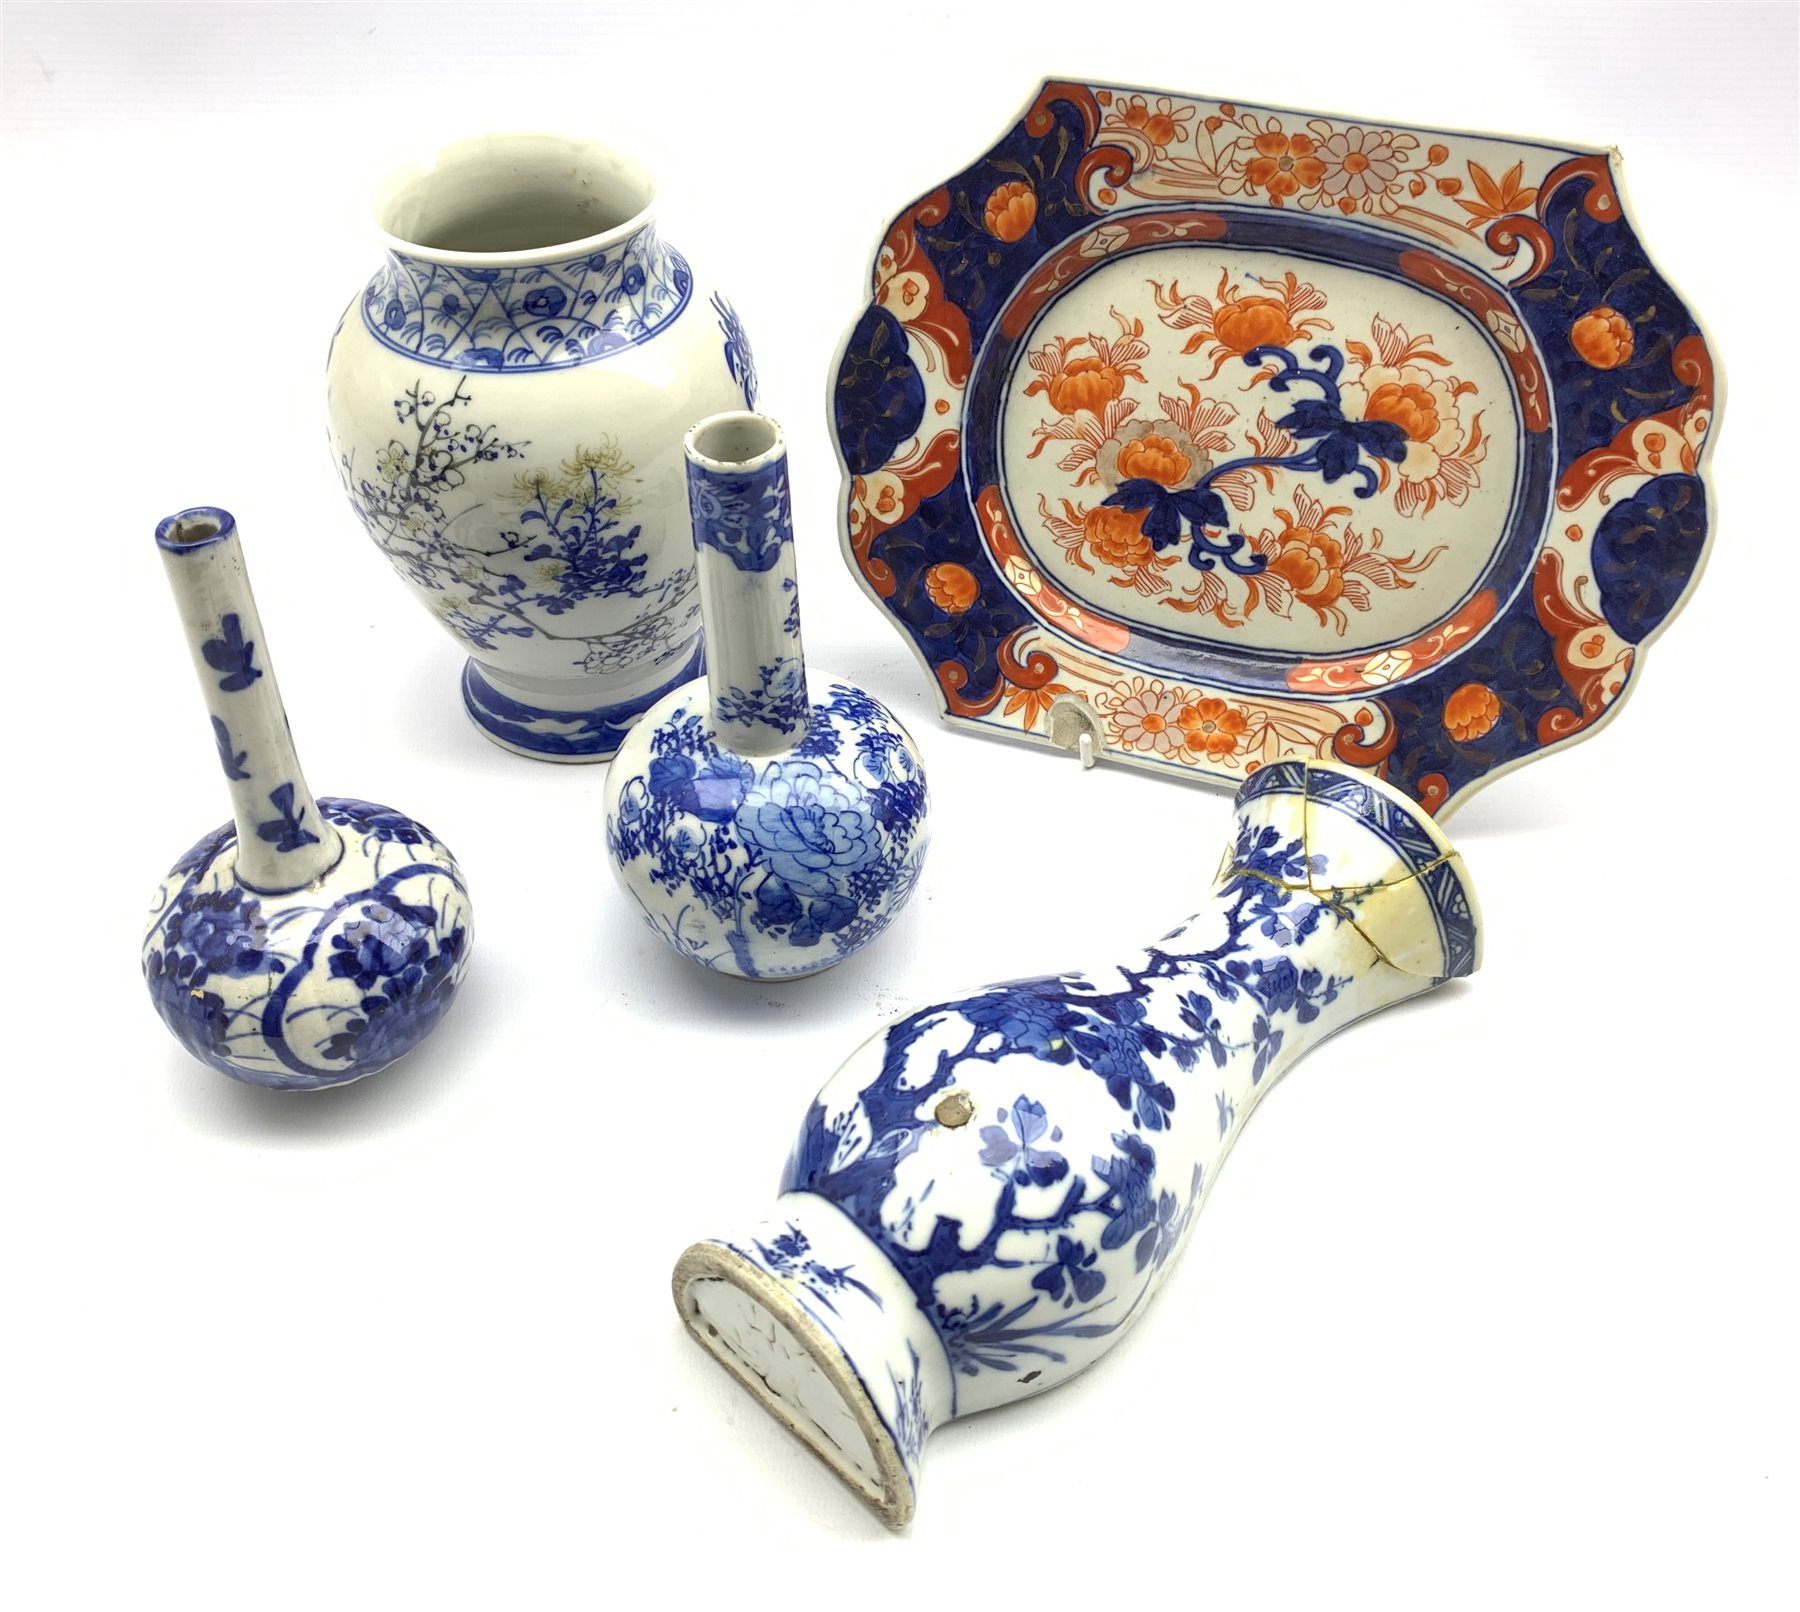 18th century Chinese blue and white vase form wall pocket (a/f), 18th/ 19th century Chinese Imari de